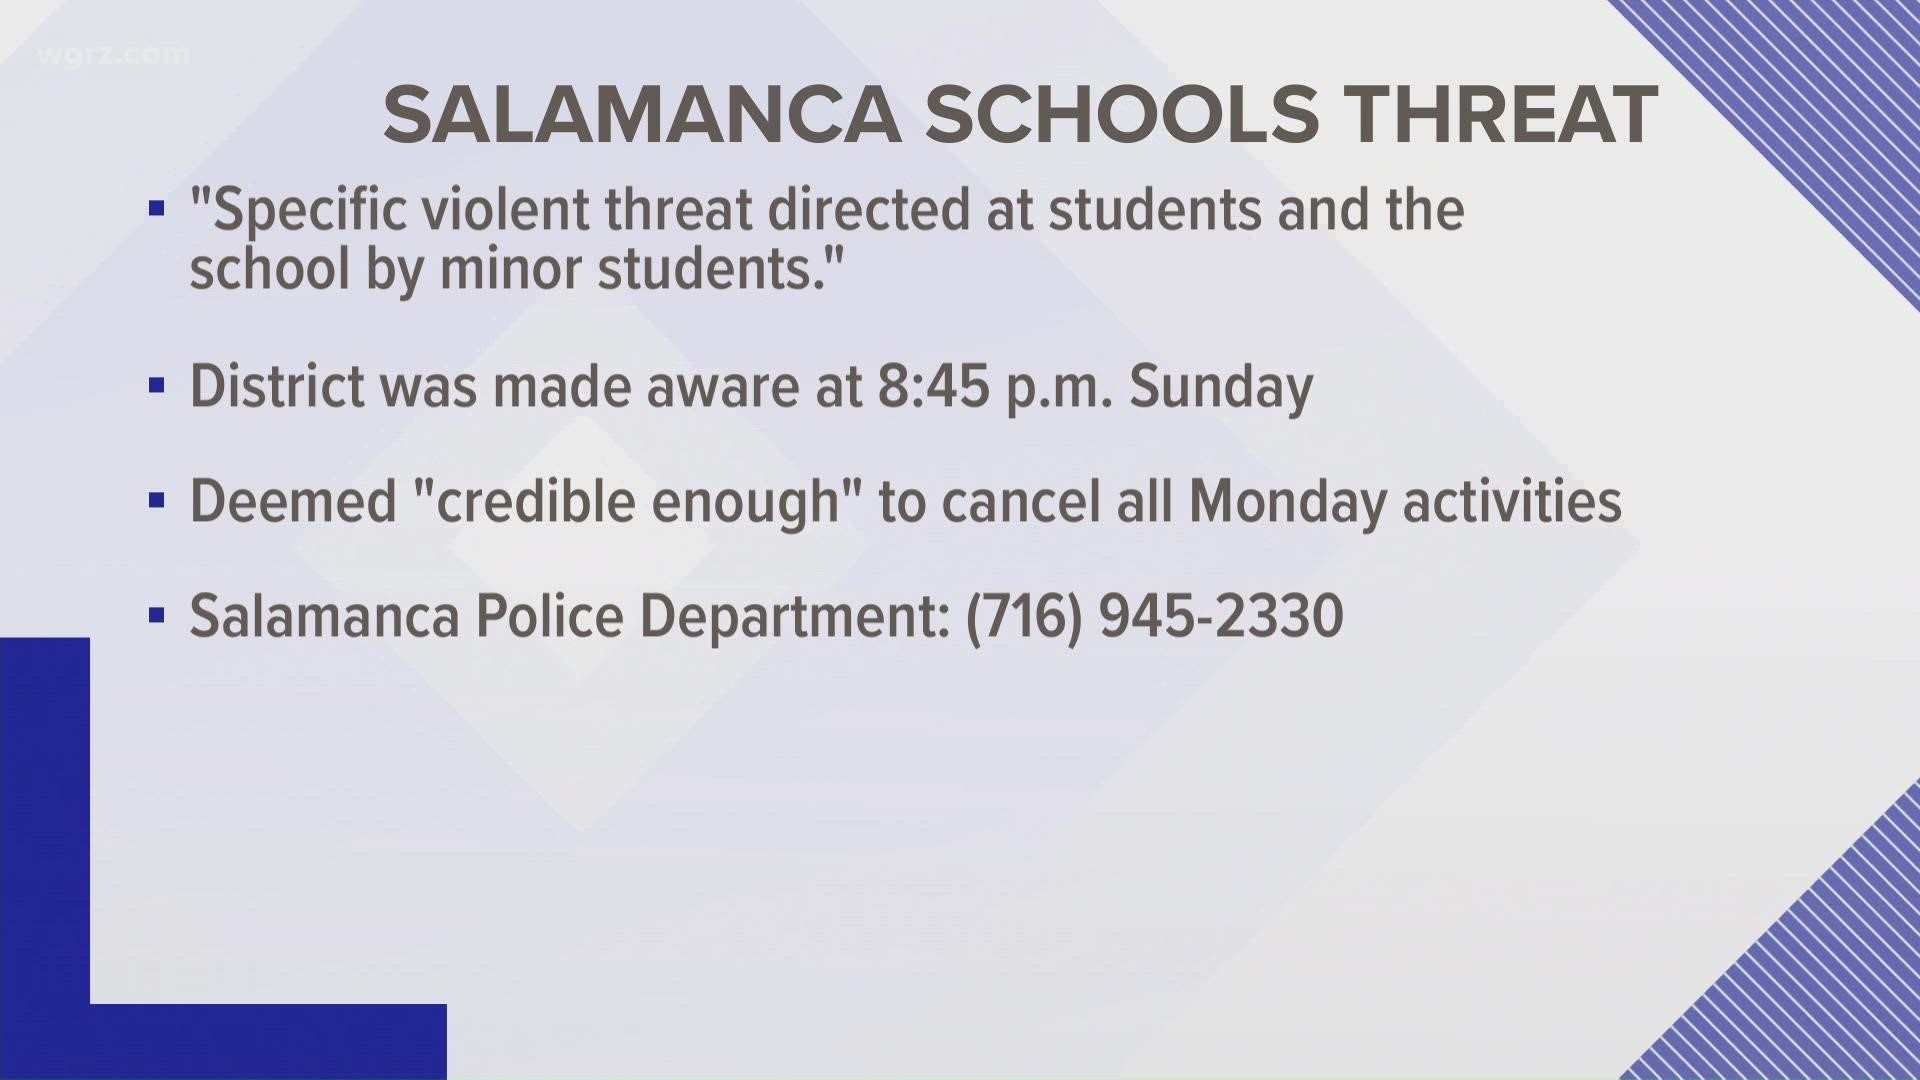 The school district said it was made aware of a threat quote directed at Salamanca students and the school by minor students at 8:45 tonight.